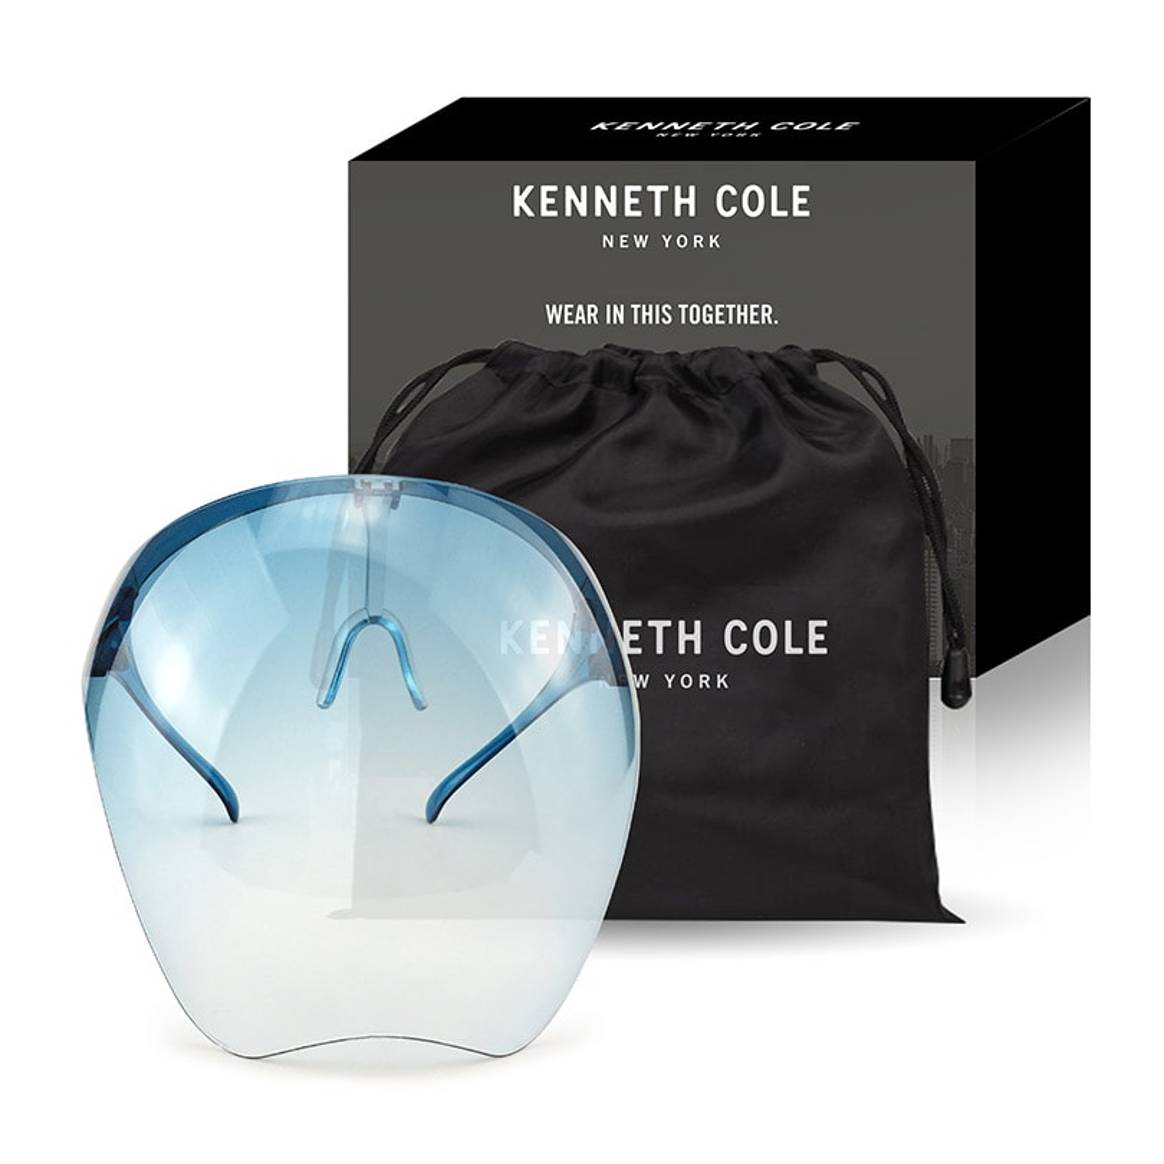 Kenneth Cole launches fashionable goggle-style face shield with 180° safety coverage